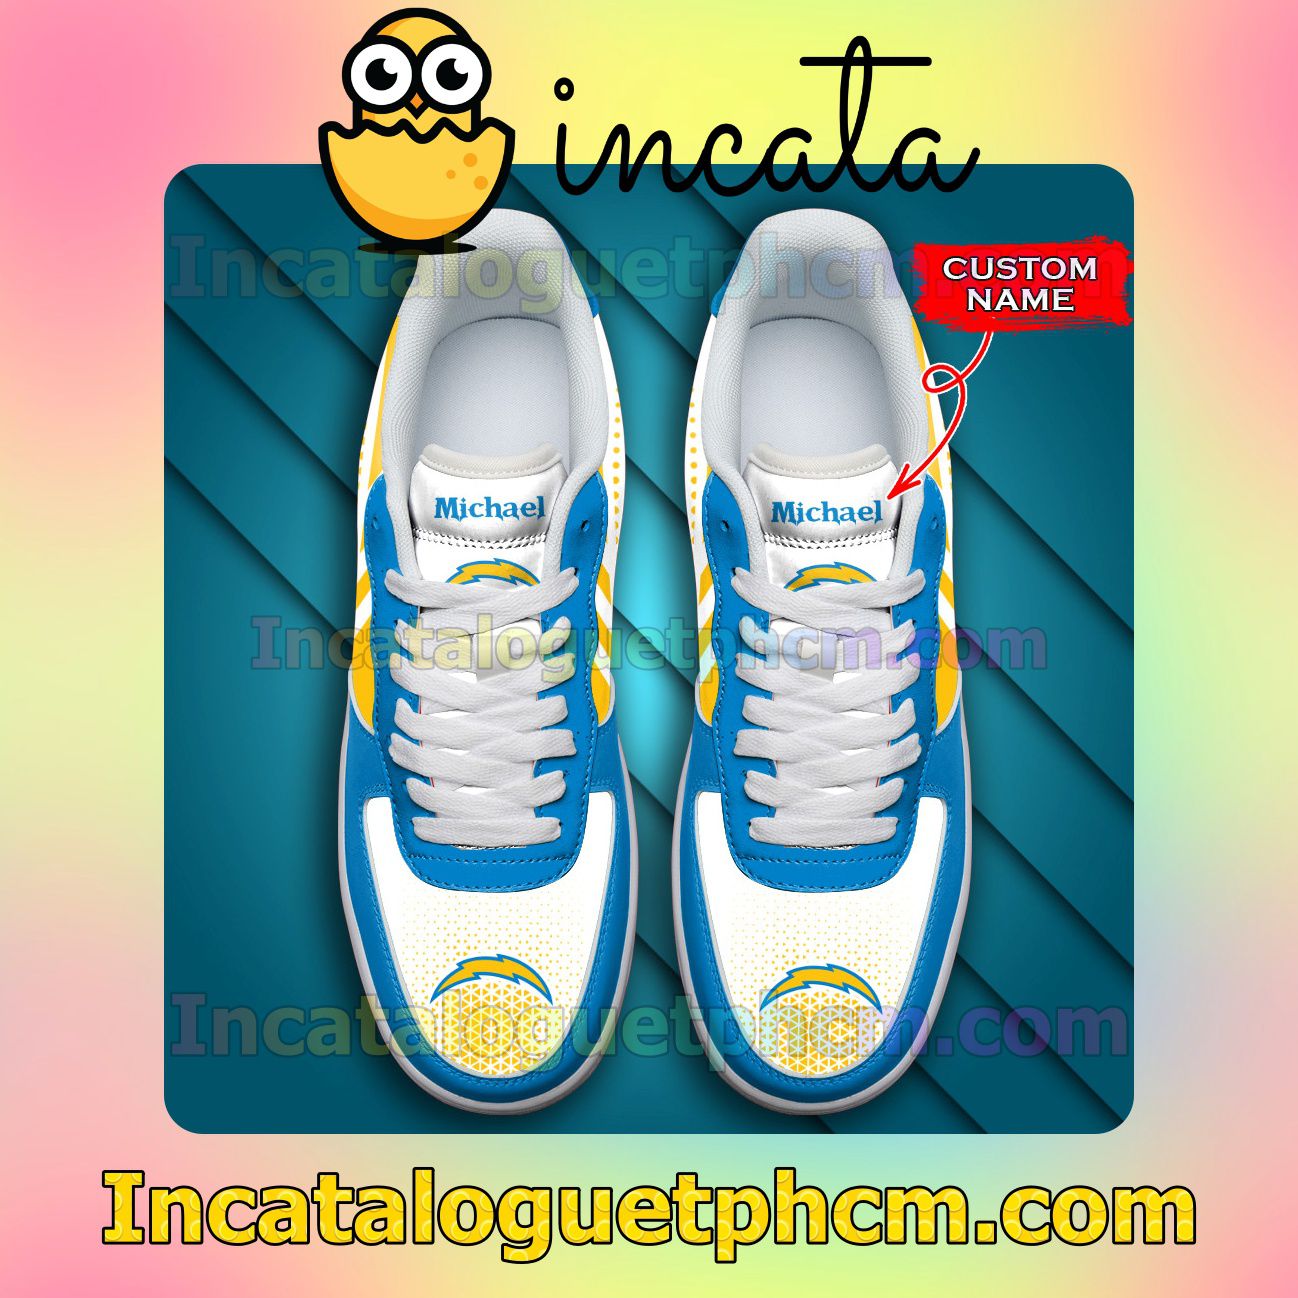 Get Here Personalized NFL Los Angeles Chargers Custom Name Nike Low Shoes Sneakers